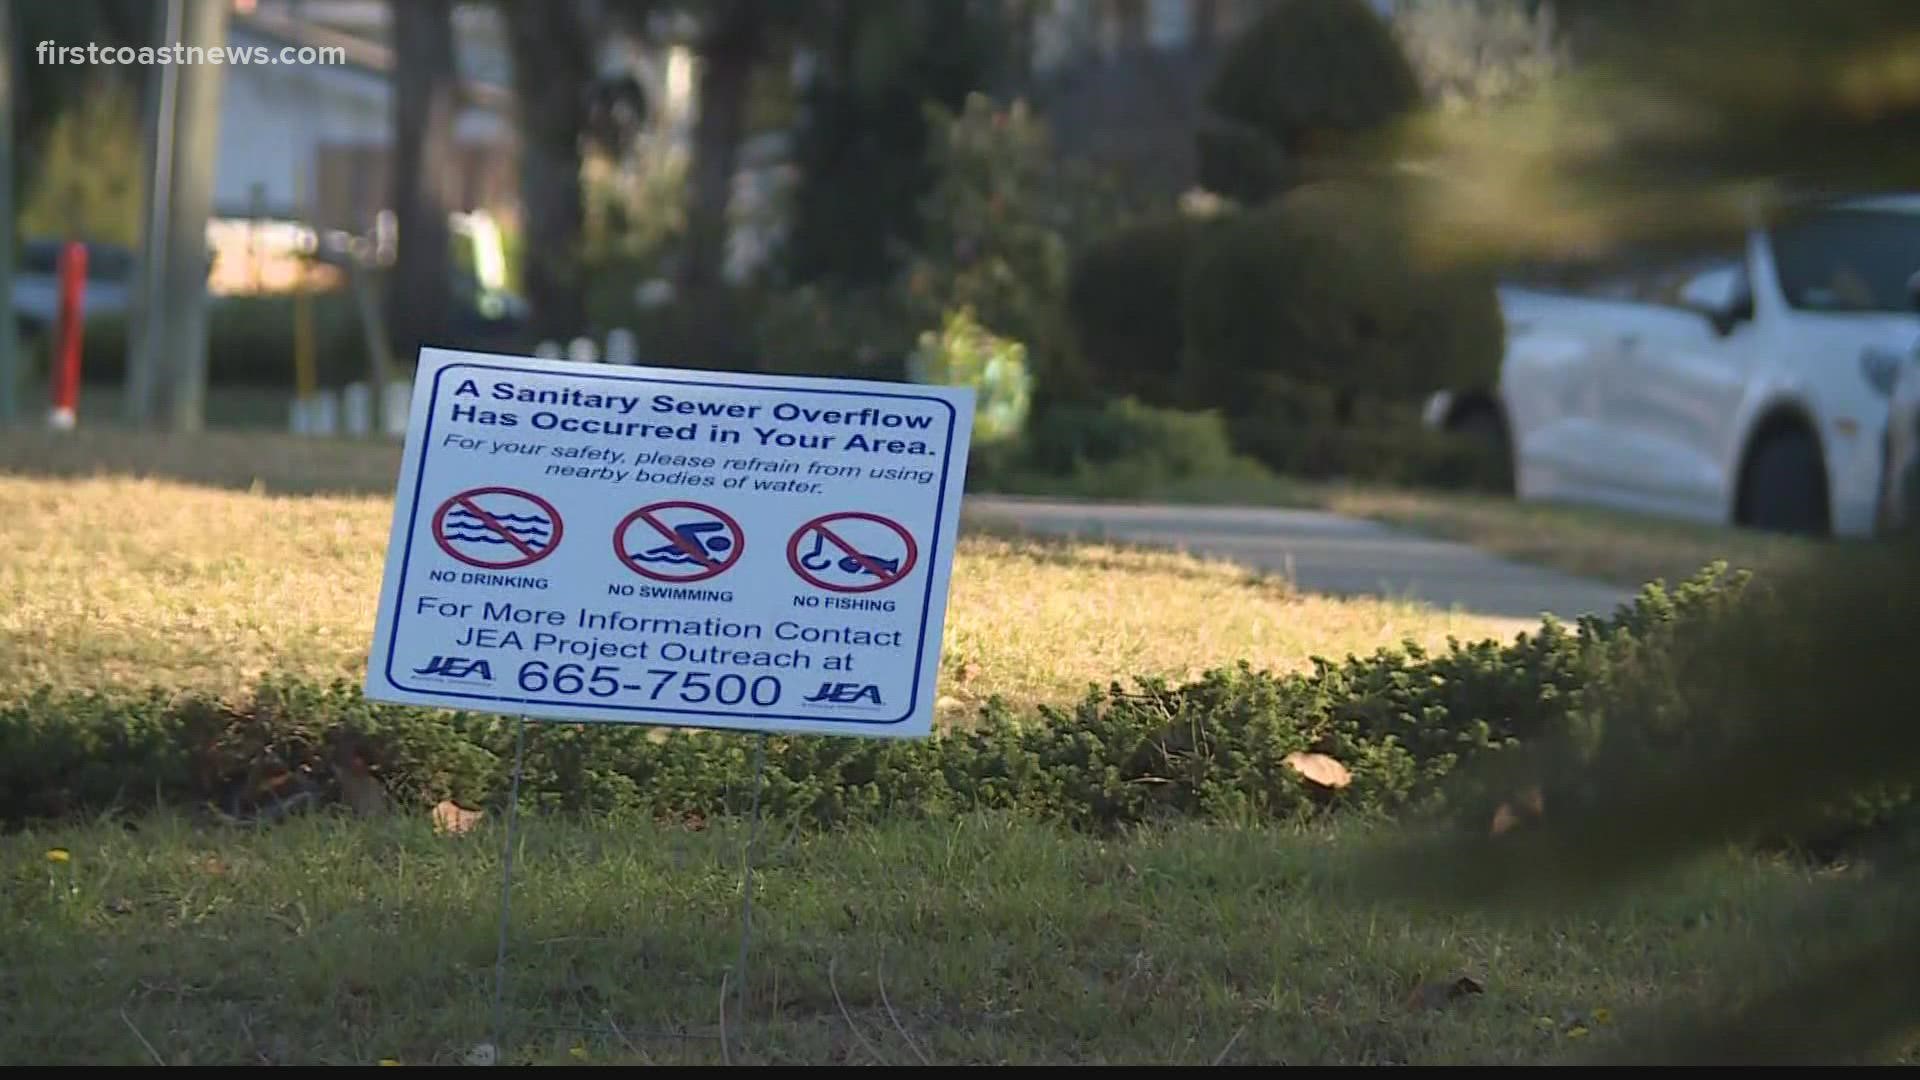 JEA recommends people not to swim, drink or fish from bodies of water affected by the sewage overflow.